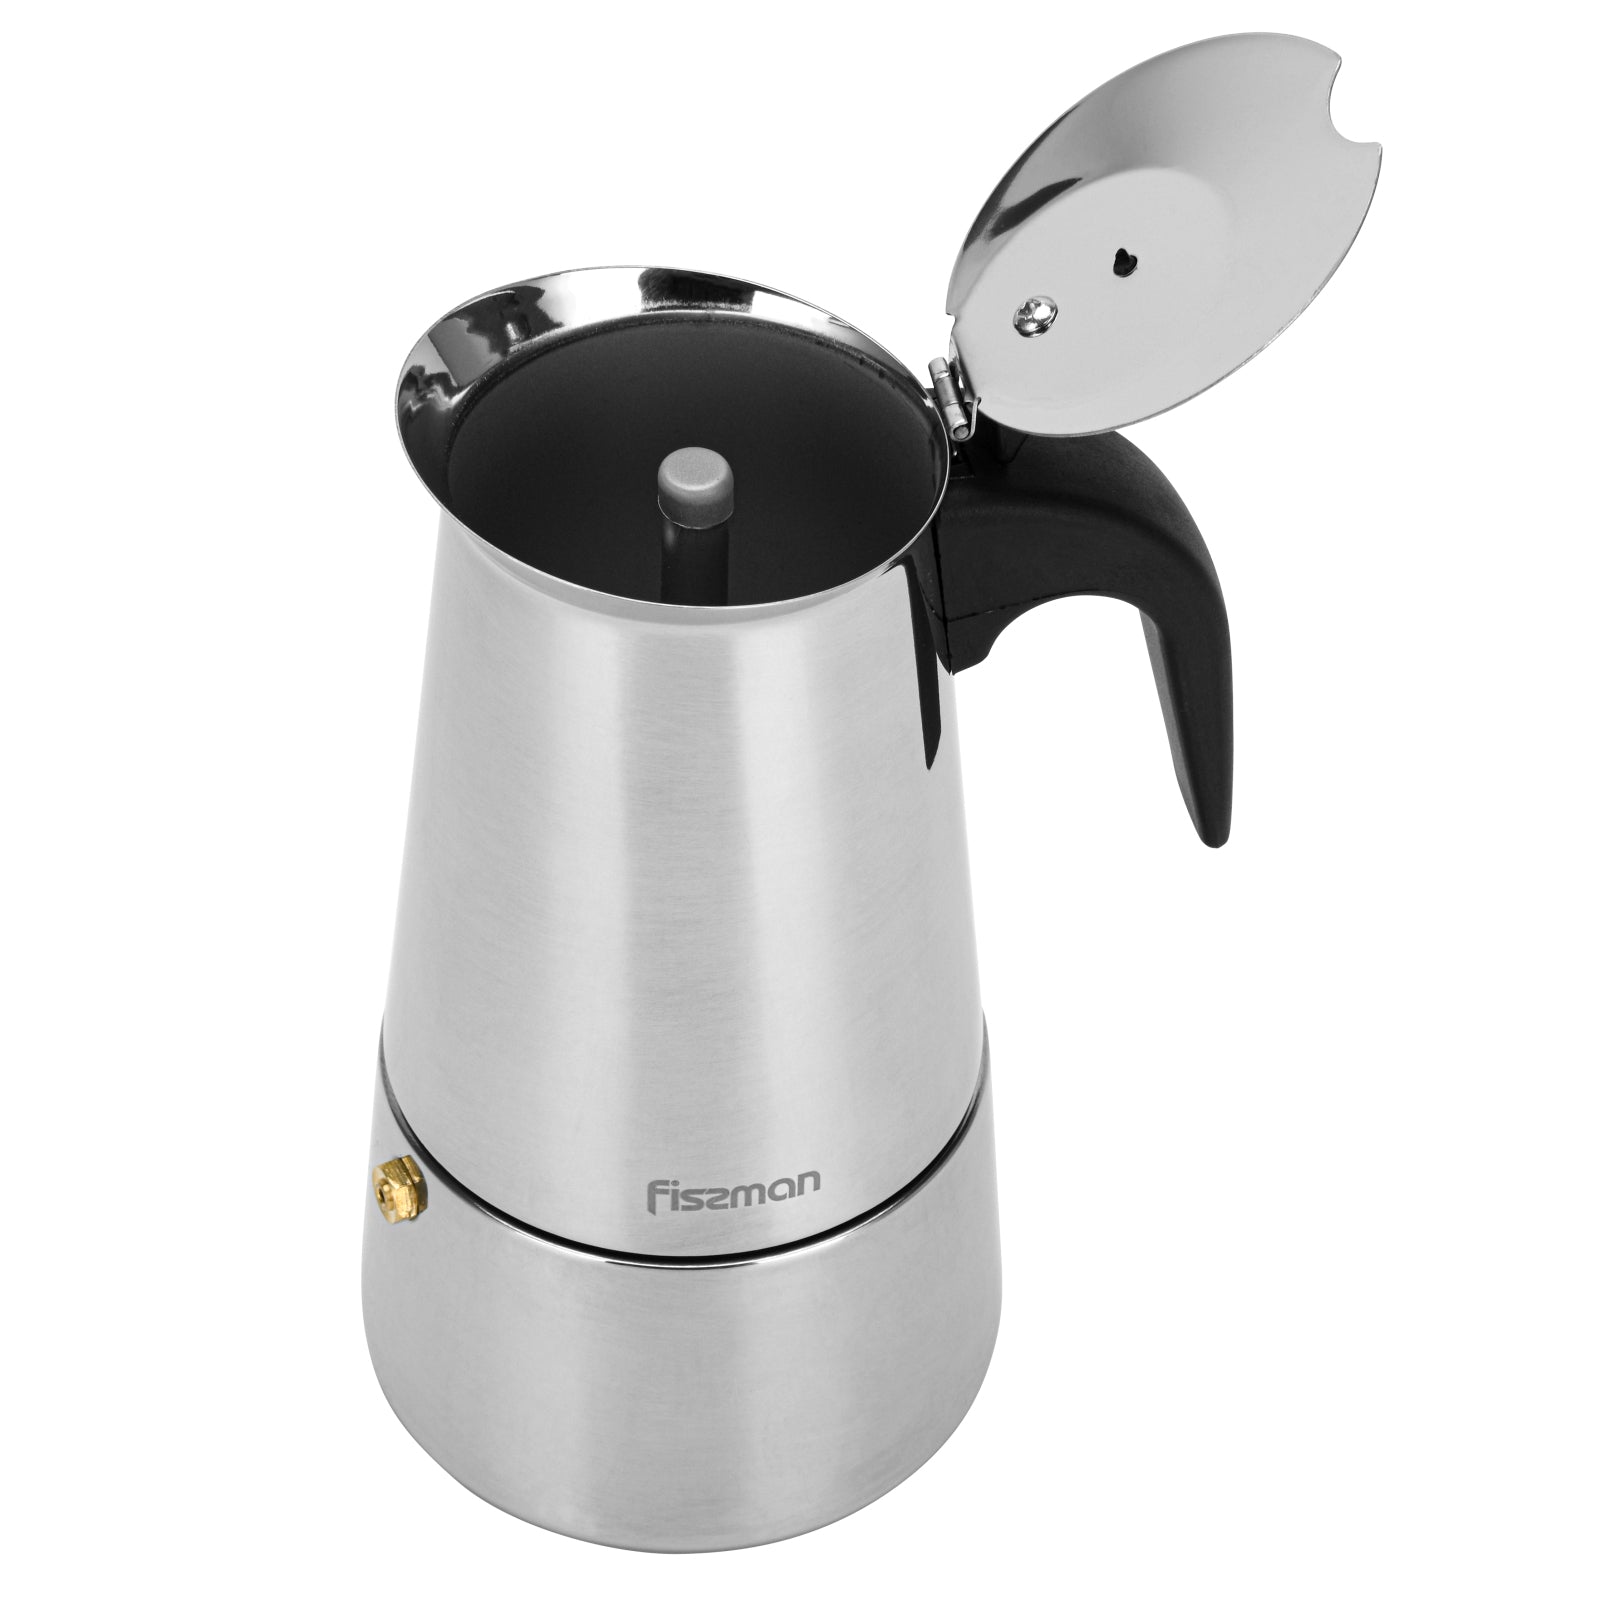 Fissman Coffee Maker (450ml) For 9 Cups (Stainless Steel)